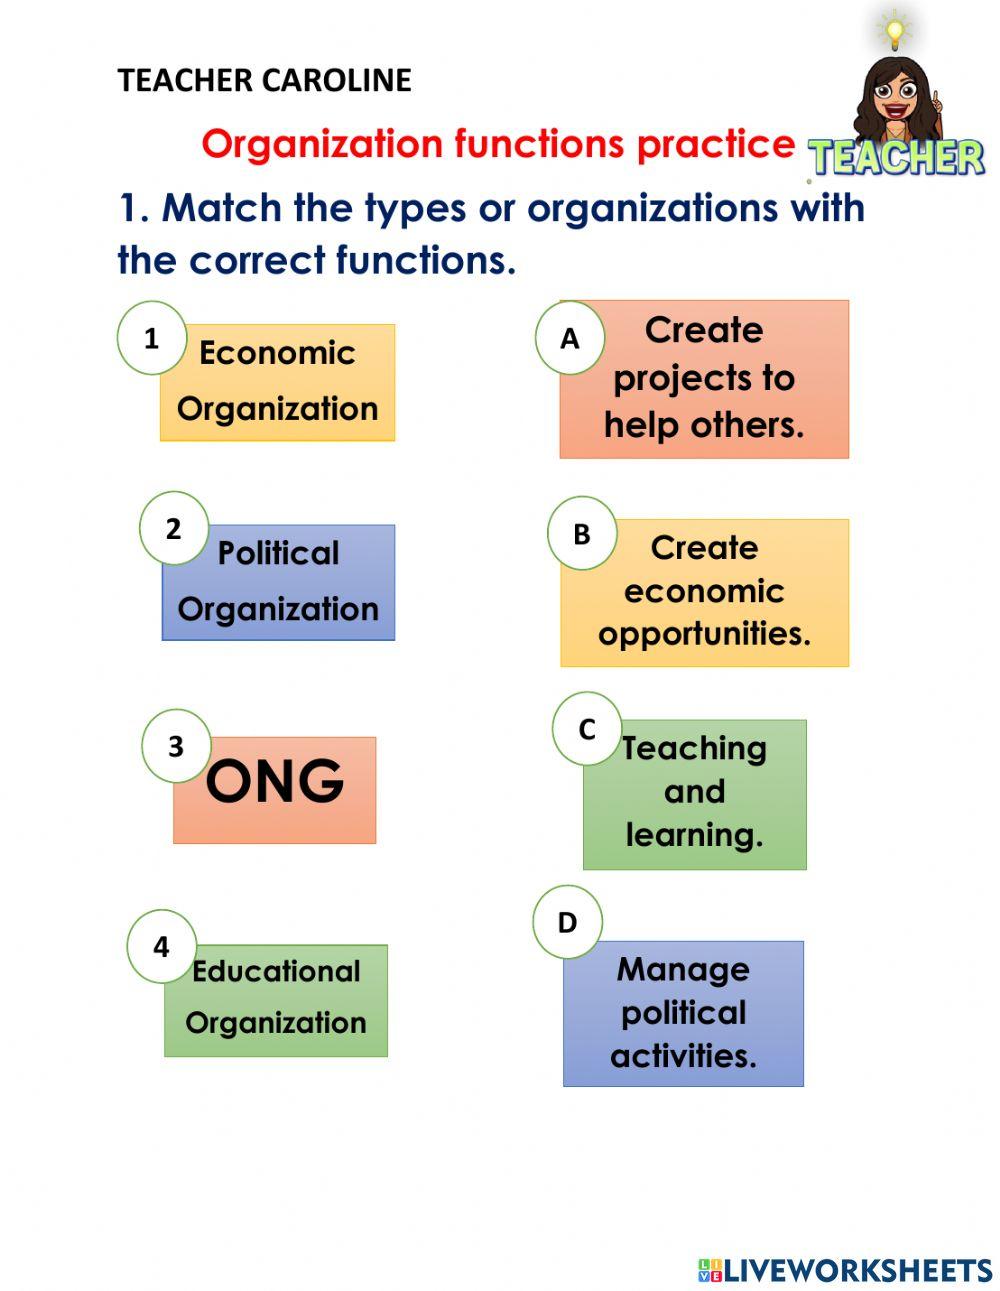 Organizations and functions